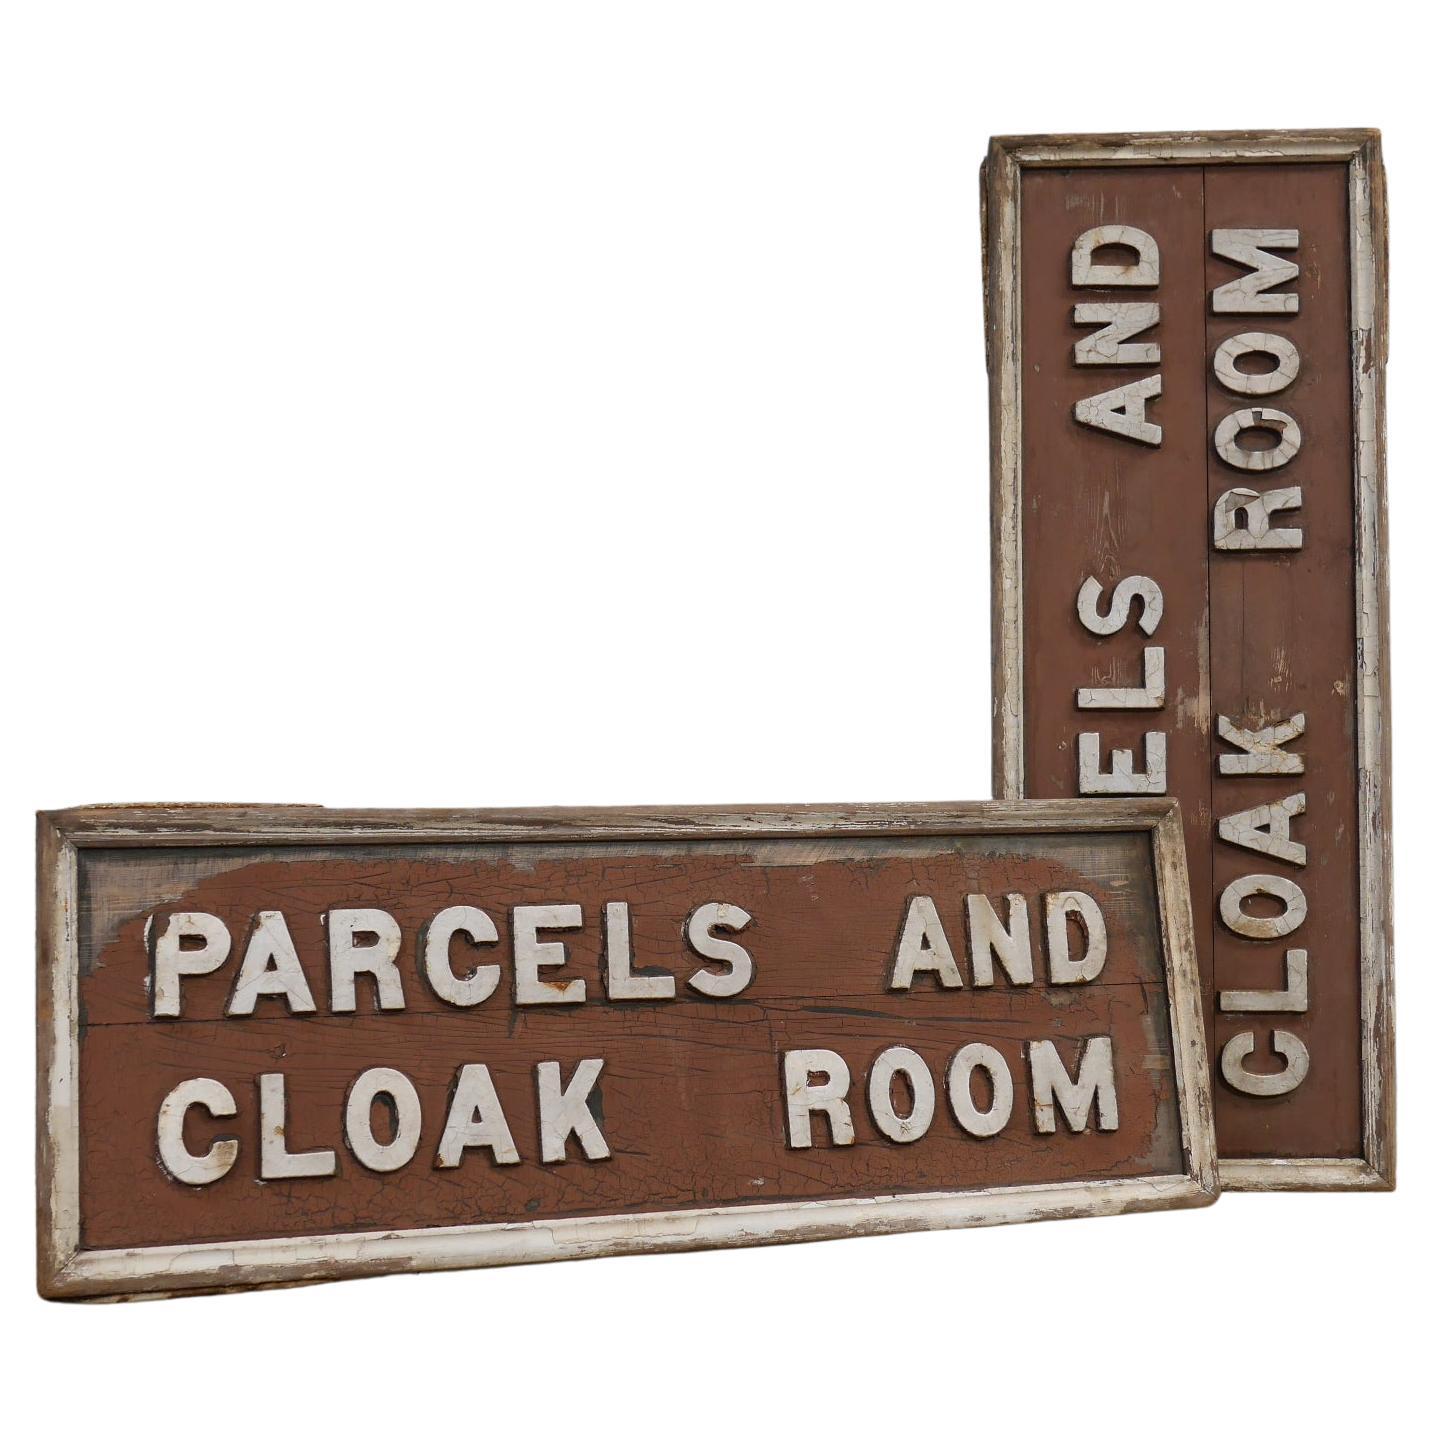 Early Timber & Iron 'Parcels and Cloak Room' Railway Signs - Two Available